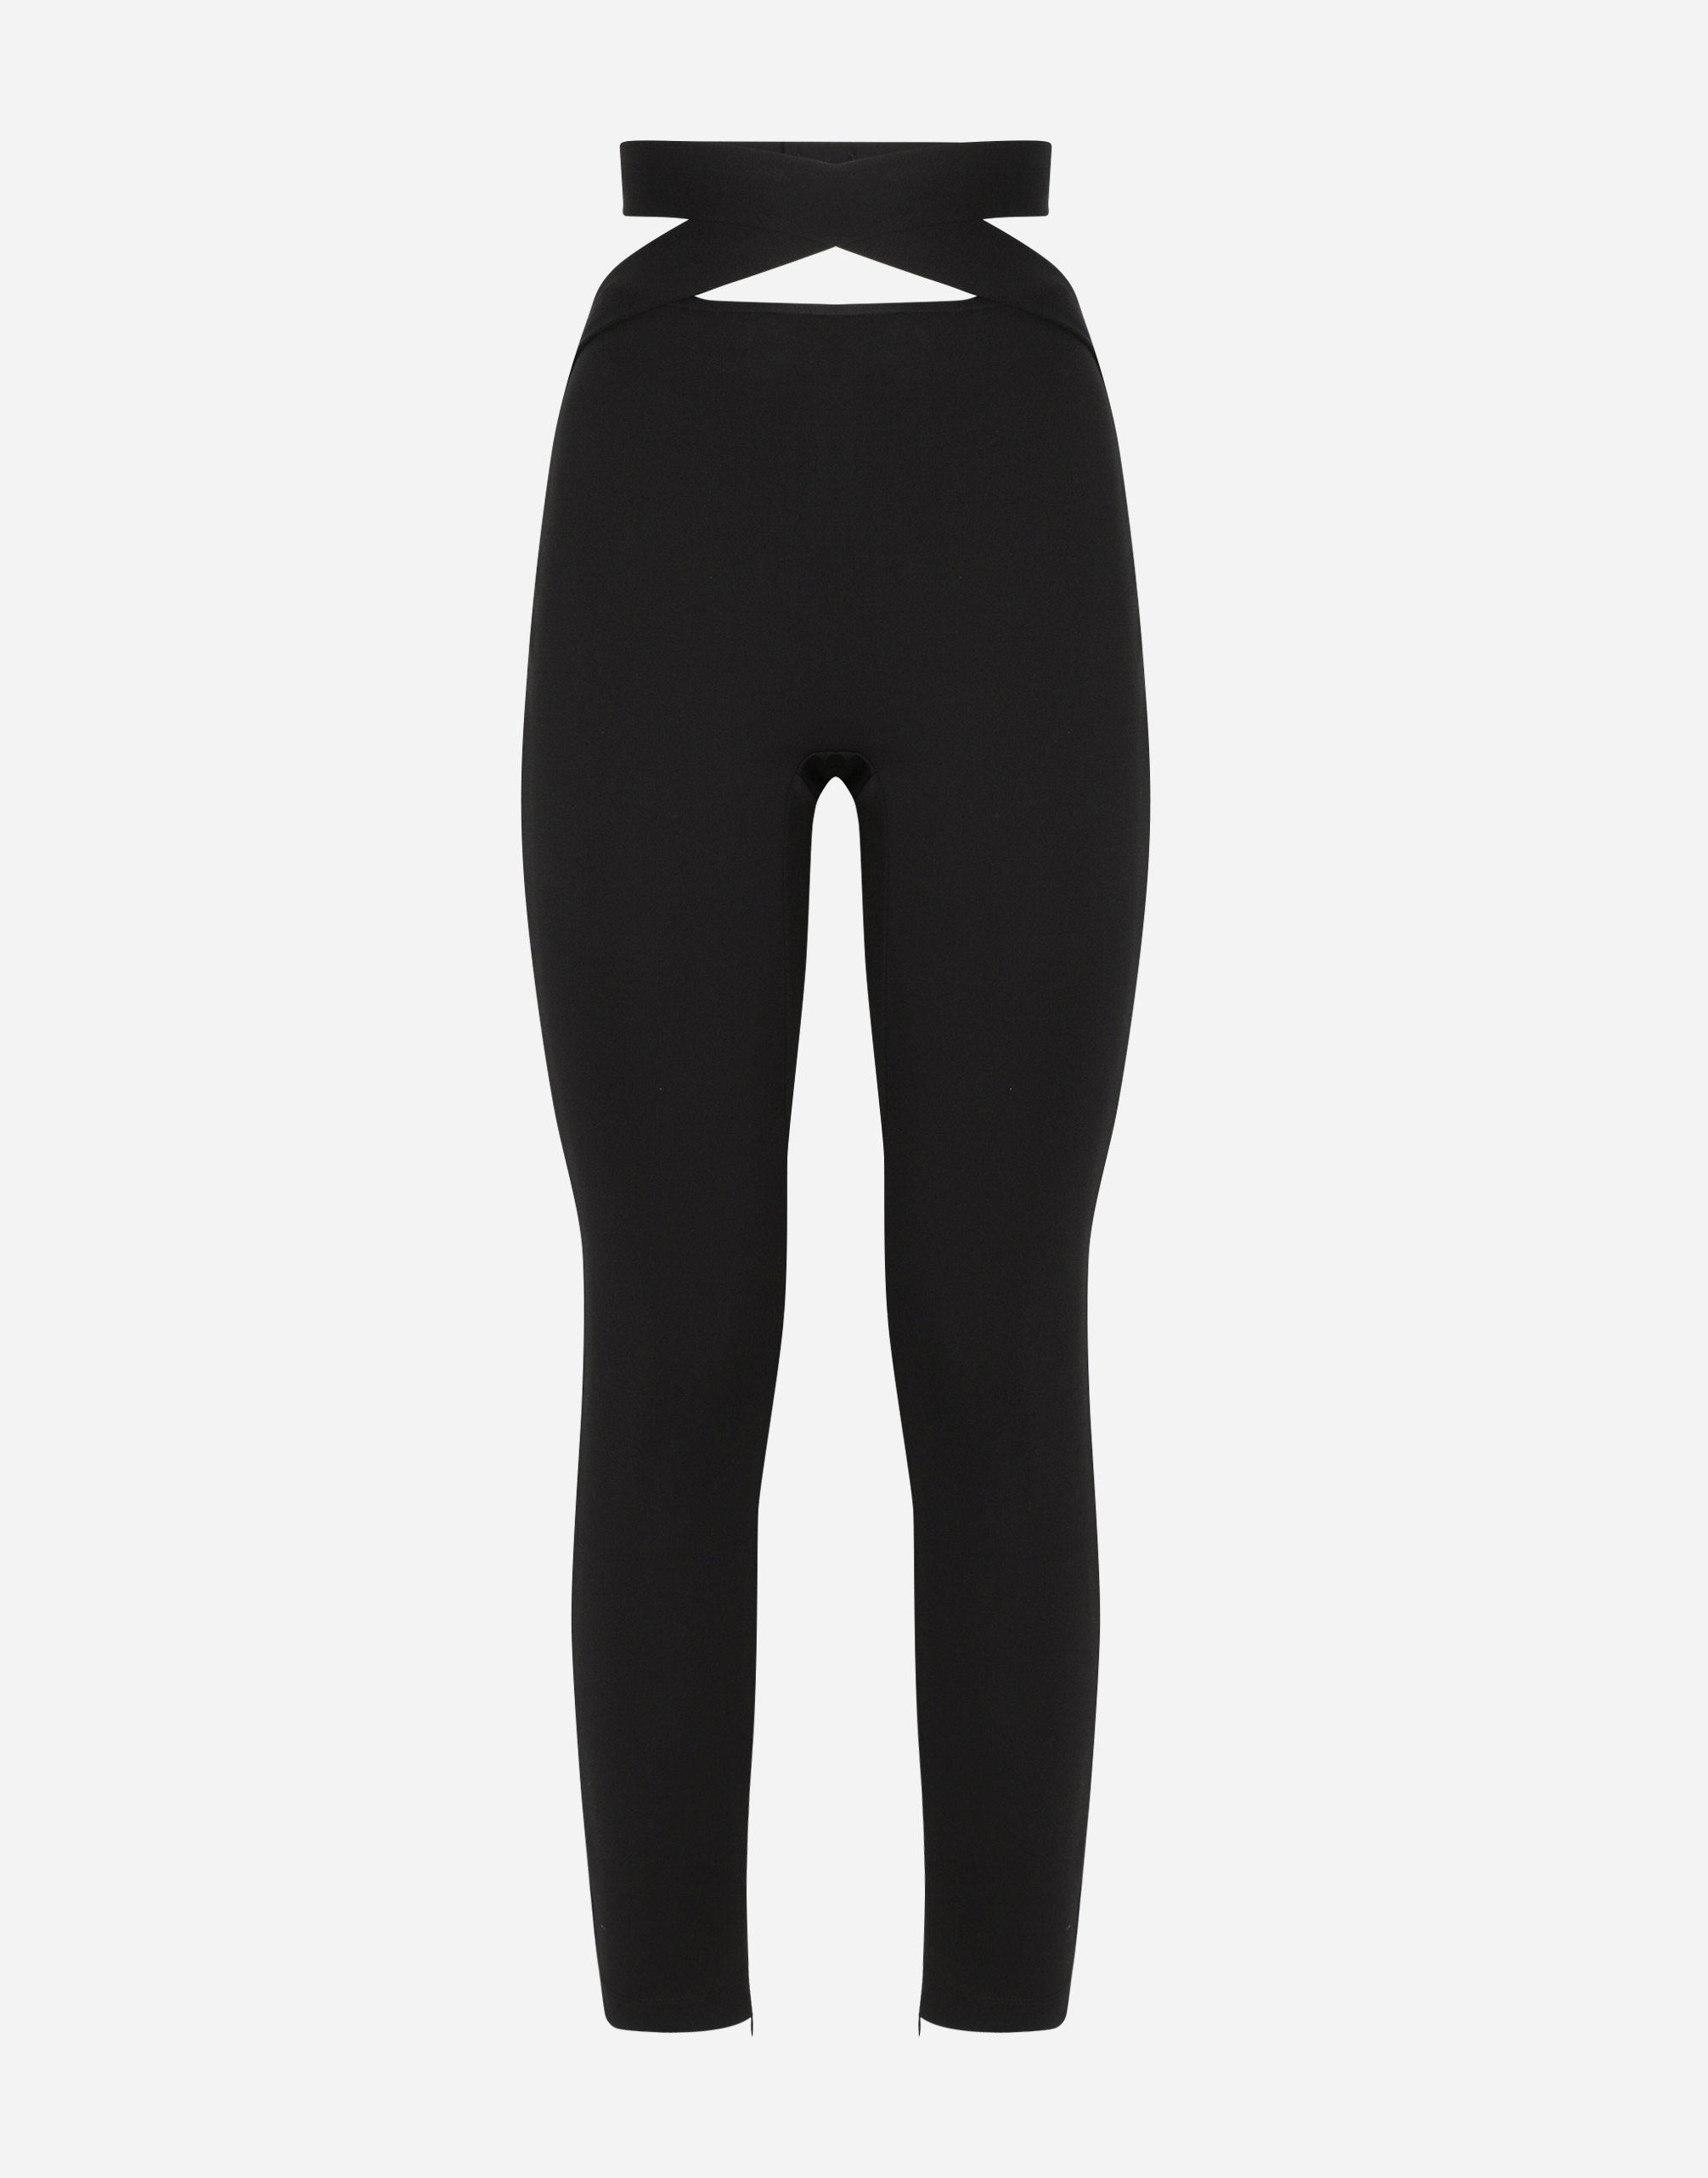 Viscose pants with strap detail in Black